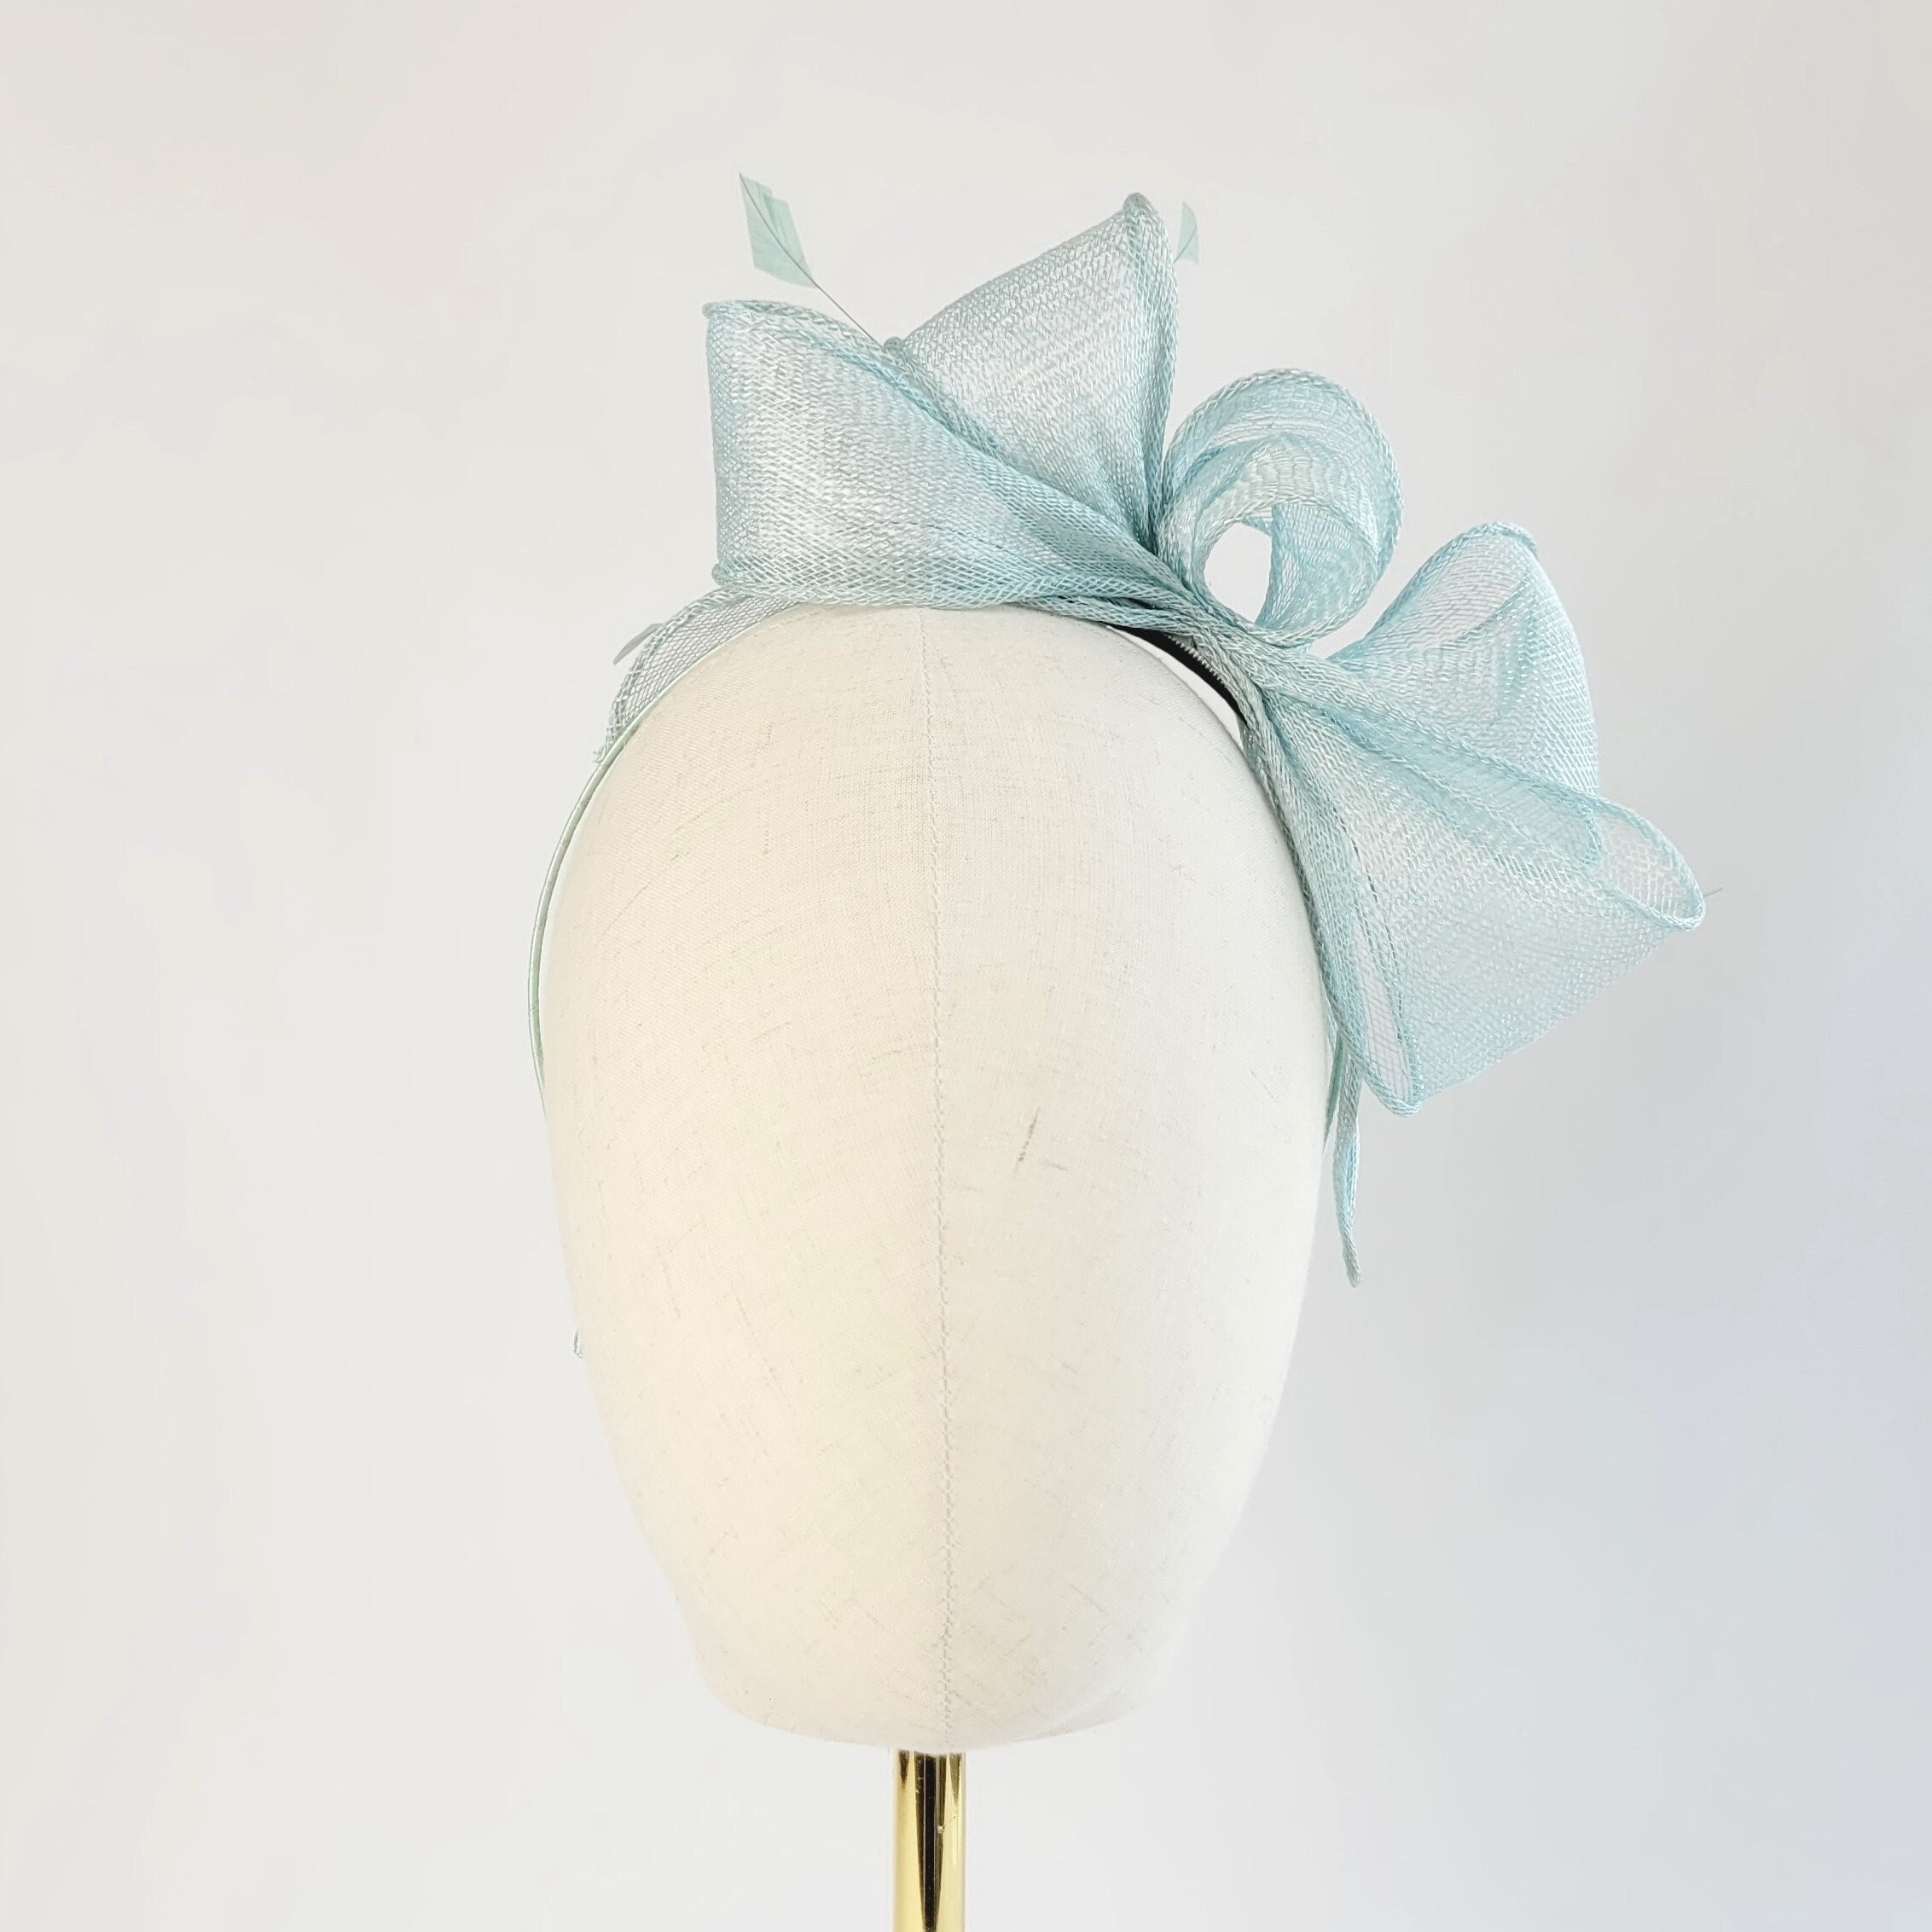 Aqua Blue Loop Fascinator With Coque Feathers, Pale Sinamay Fascinator, Wedding Race Day